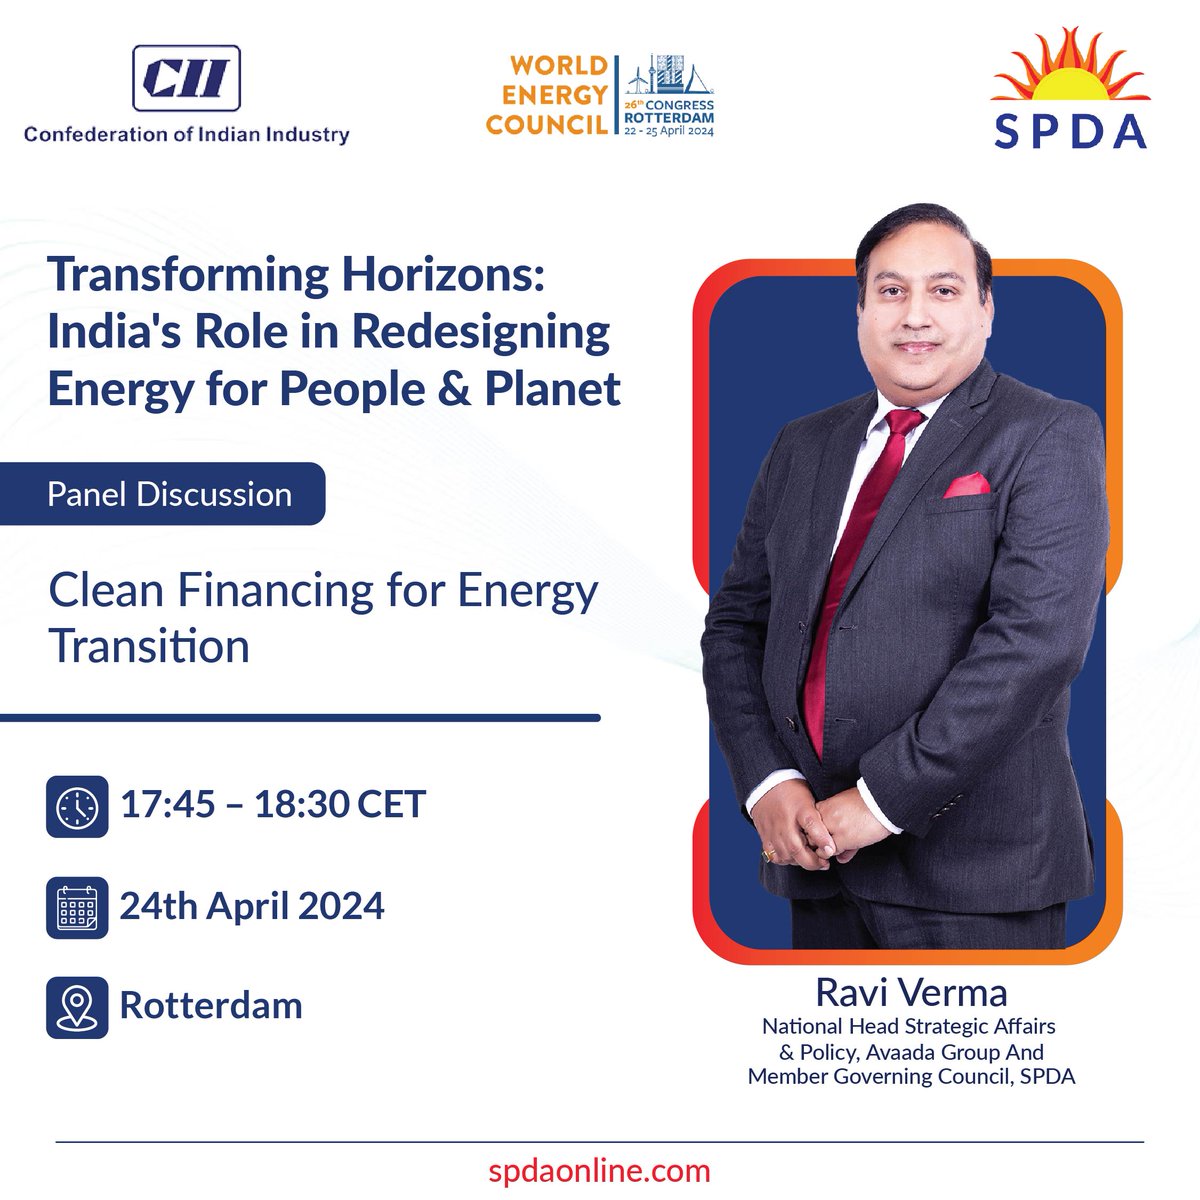 Mr. Ravi Verma, Member Governing Council #SPDA, will be sharing his insights on 'Clean Financing for Energy Transition' on the side lines of  World Energy Congress.

Stay tuned for updates.

#WEC2024 #EnergyTransition #CleanEnergyRevolution #ClimateFinance